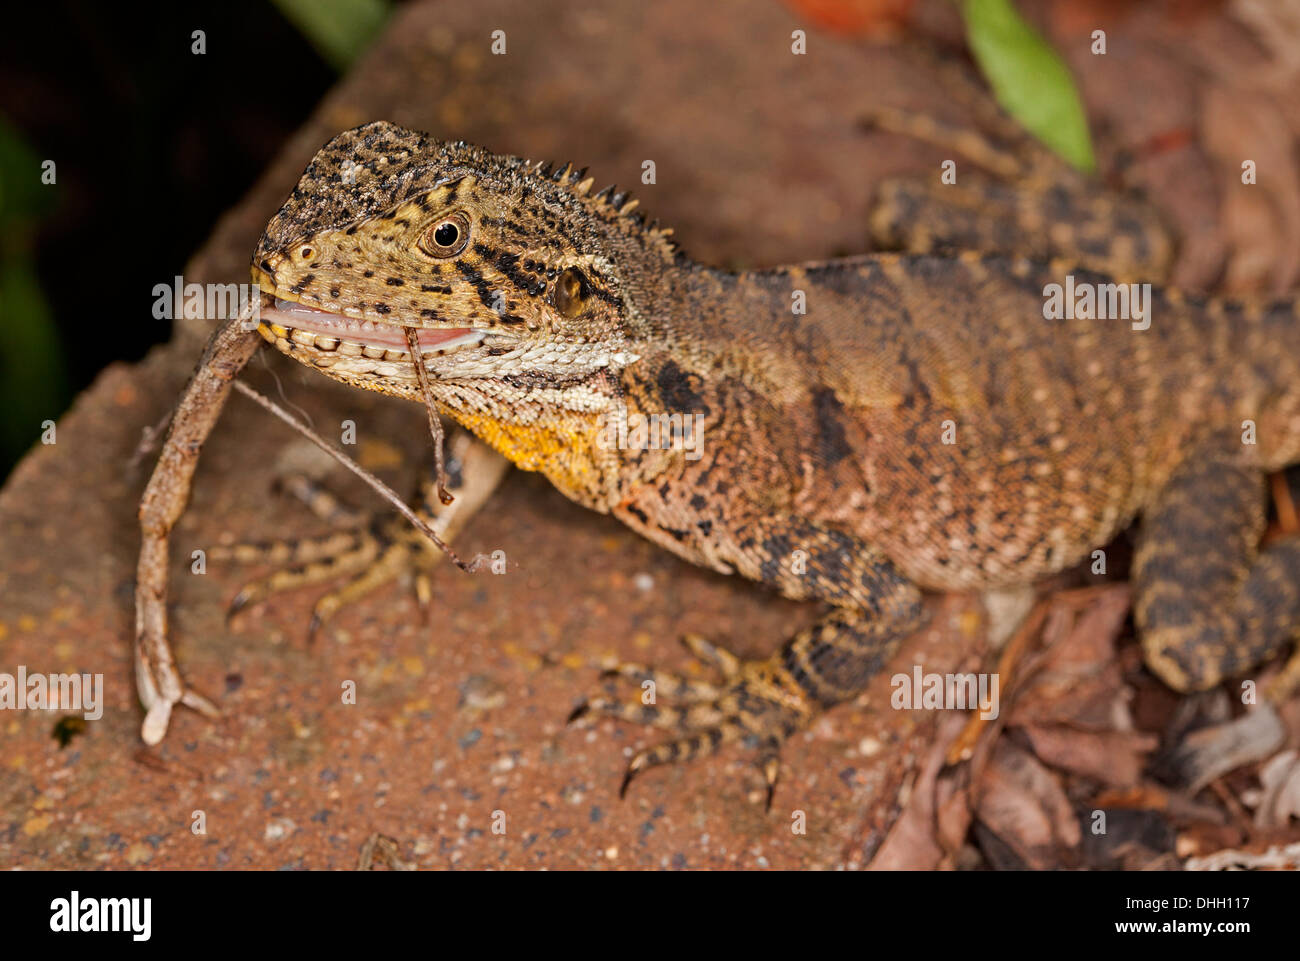 lizard eating insect